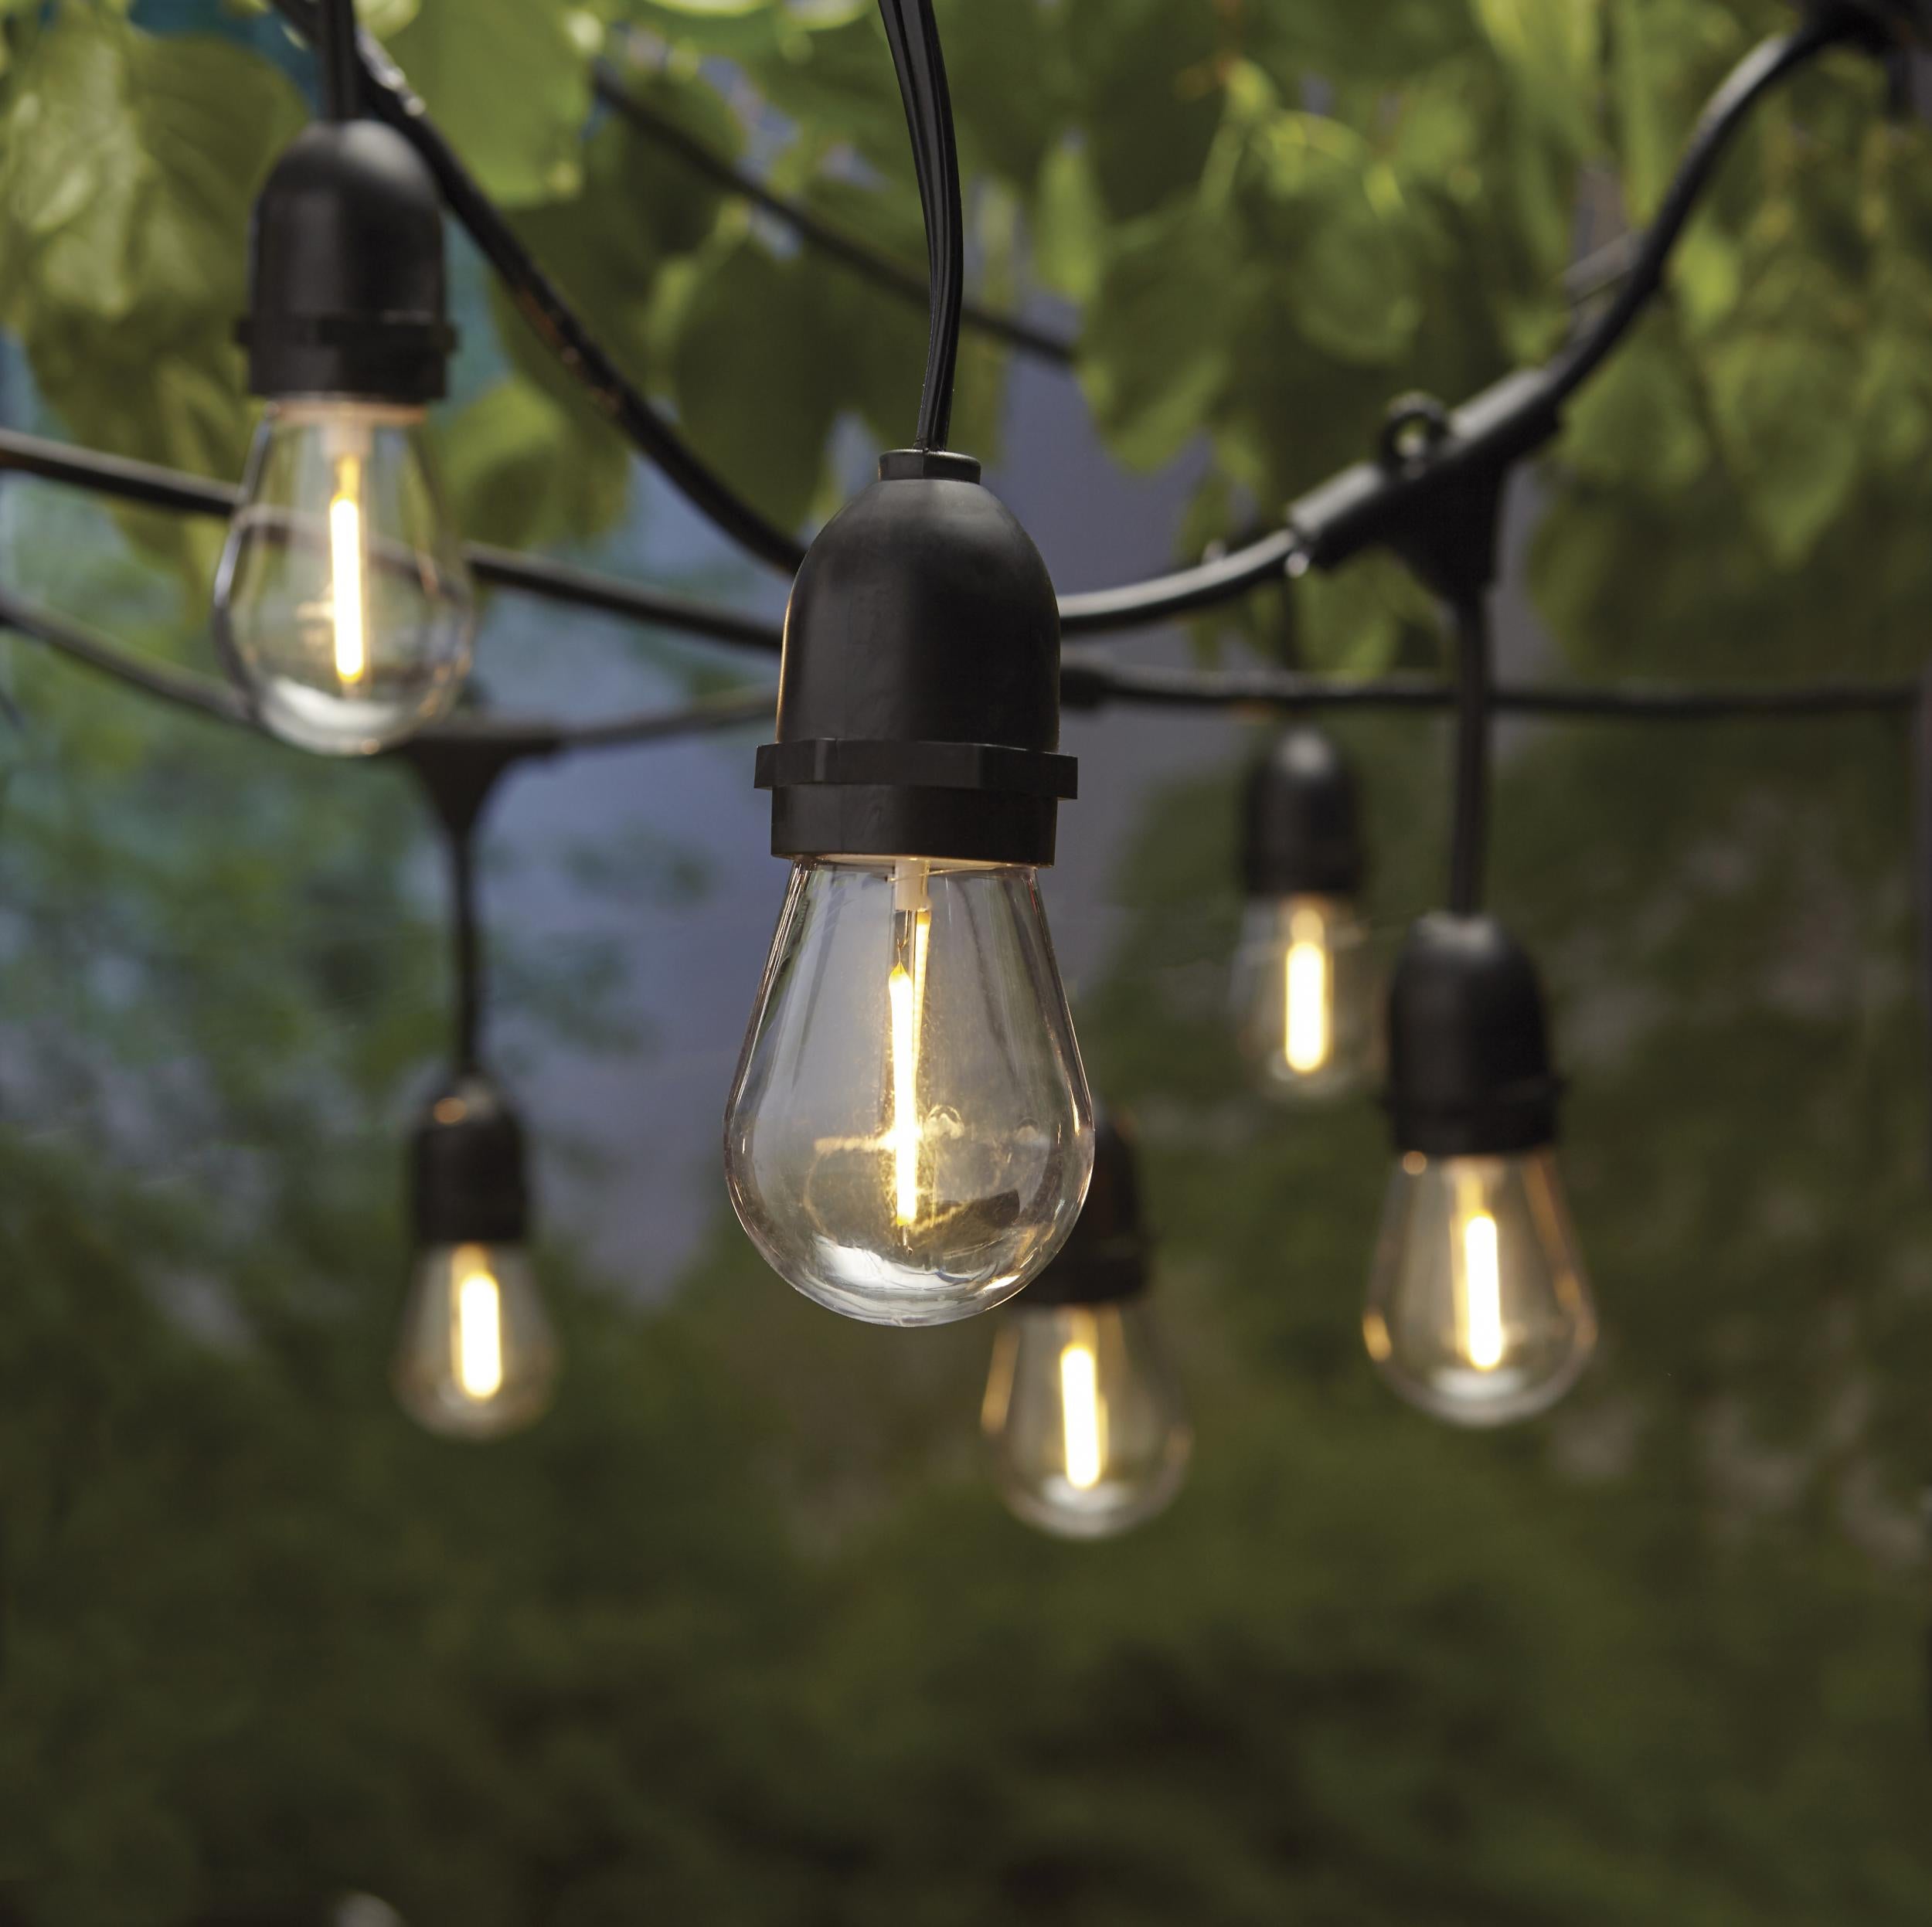 Max Humphrey recommends Edison-style string lights